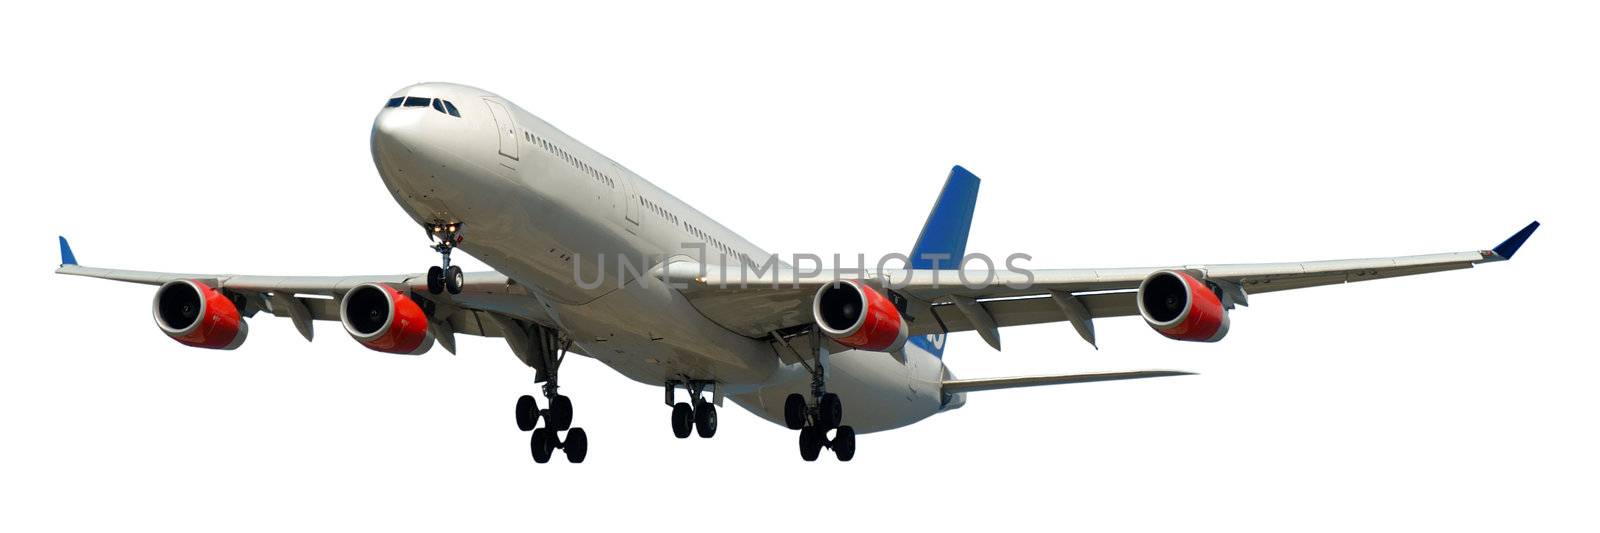 Airliner on a clean white background. 1:3